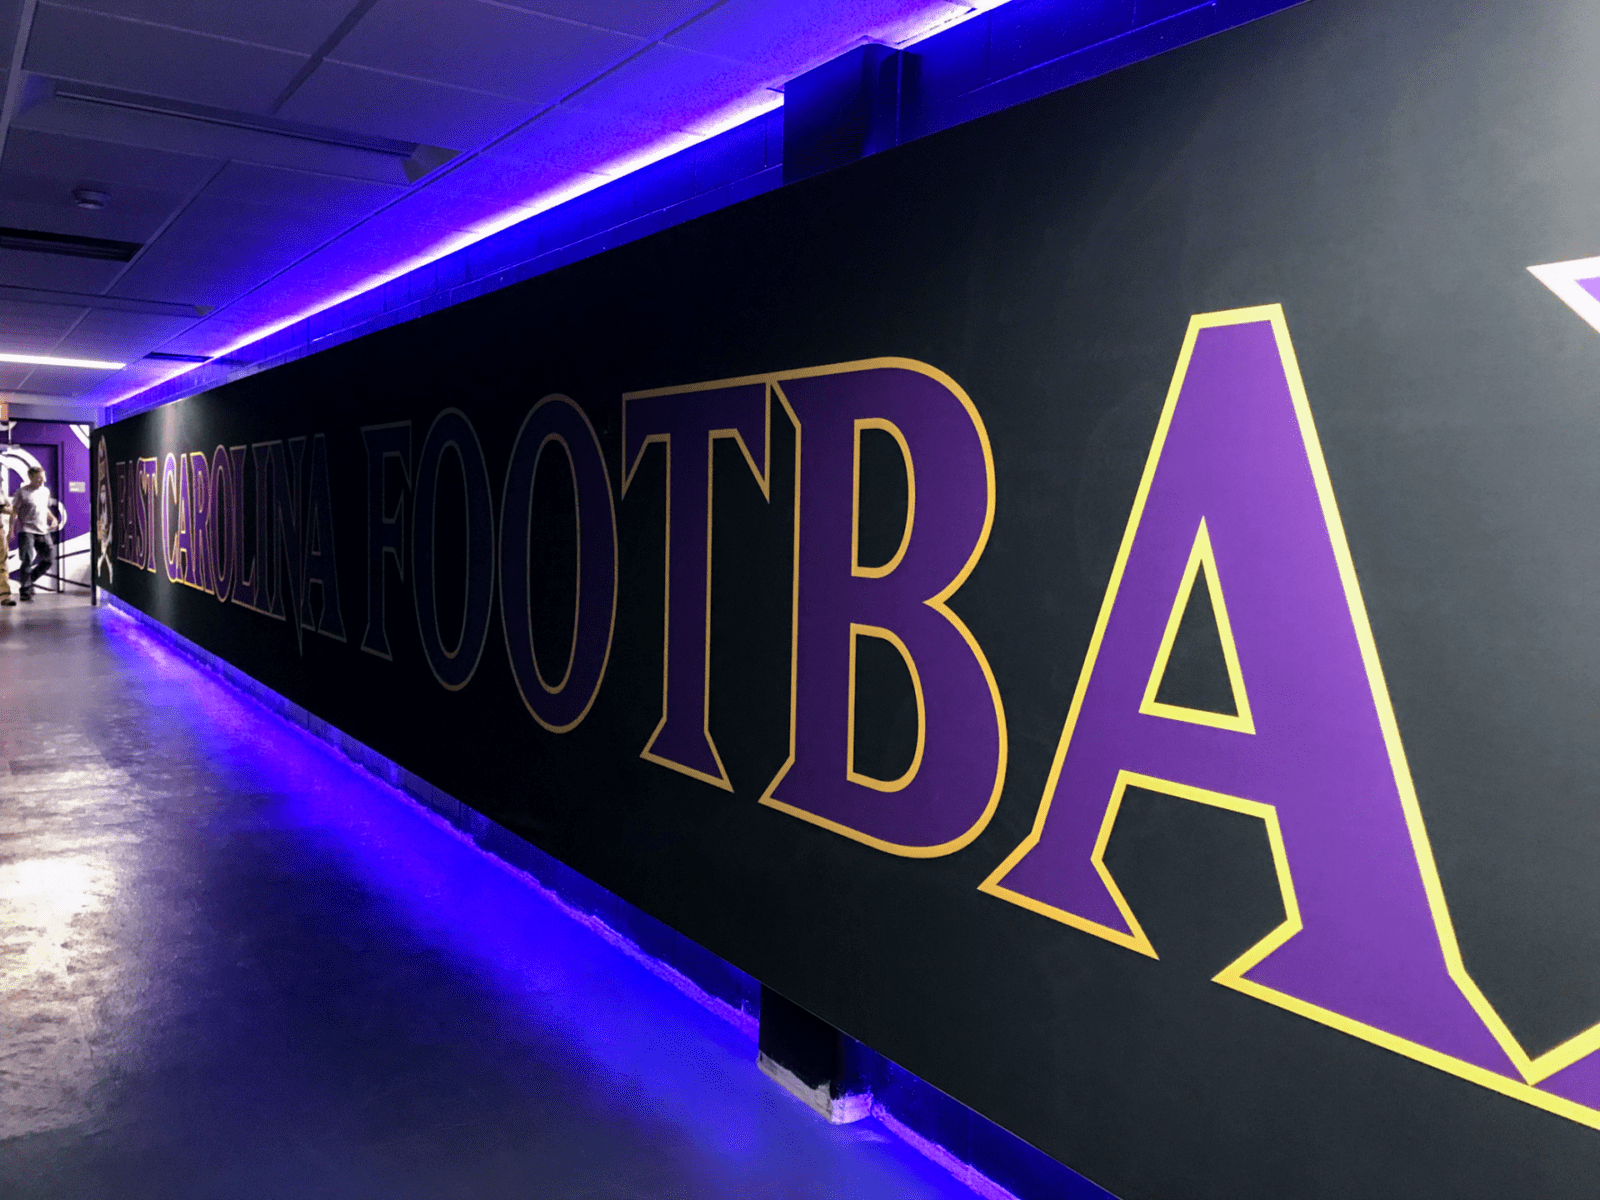 East Carolina RGBW Halo Lit Wall-Mounted Mural that spans 40 feet